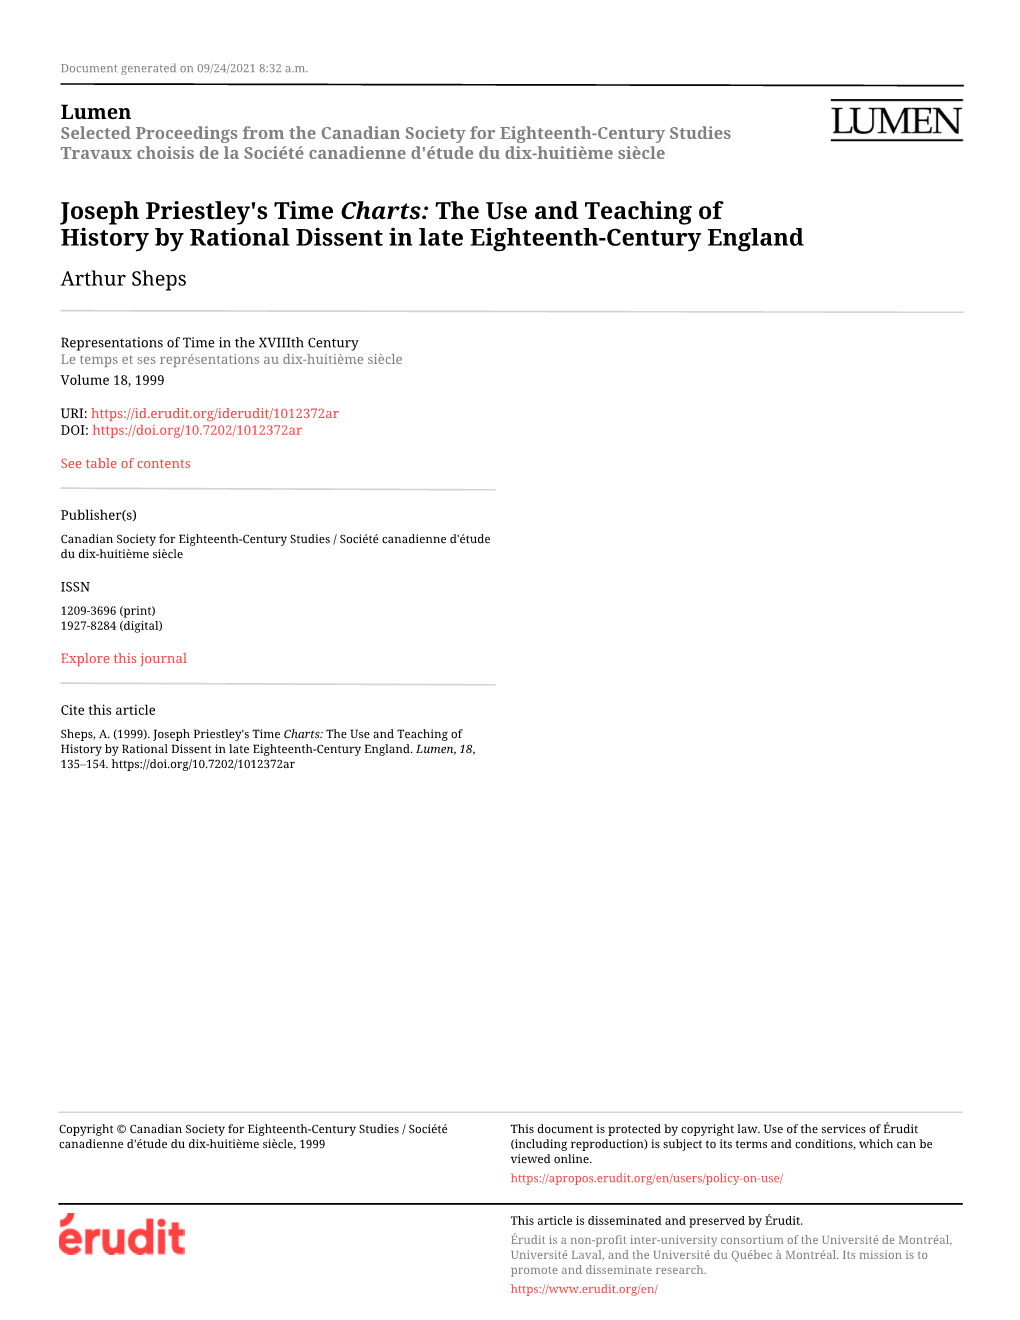 Joseph Priestley's Time Charts: the Use and Teaching of History by Rational Dissent in Late Eighteenth-Century England Arthur Sheps